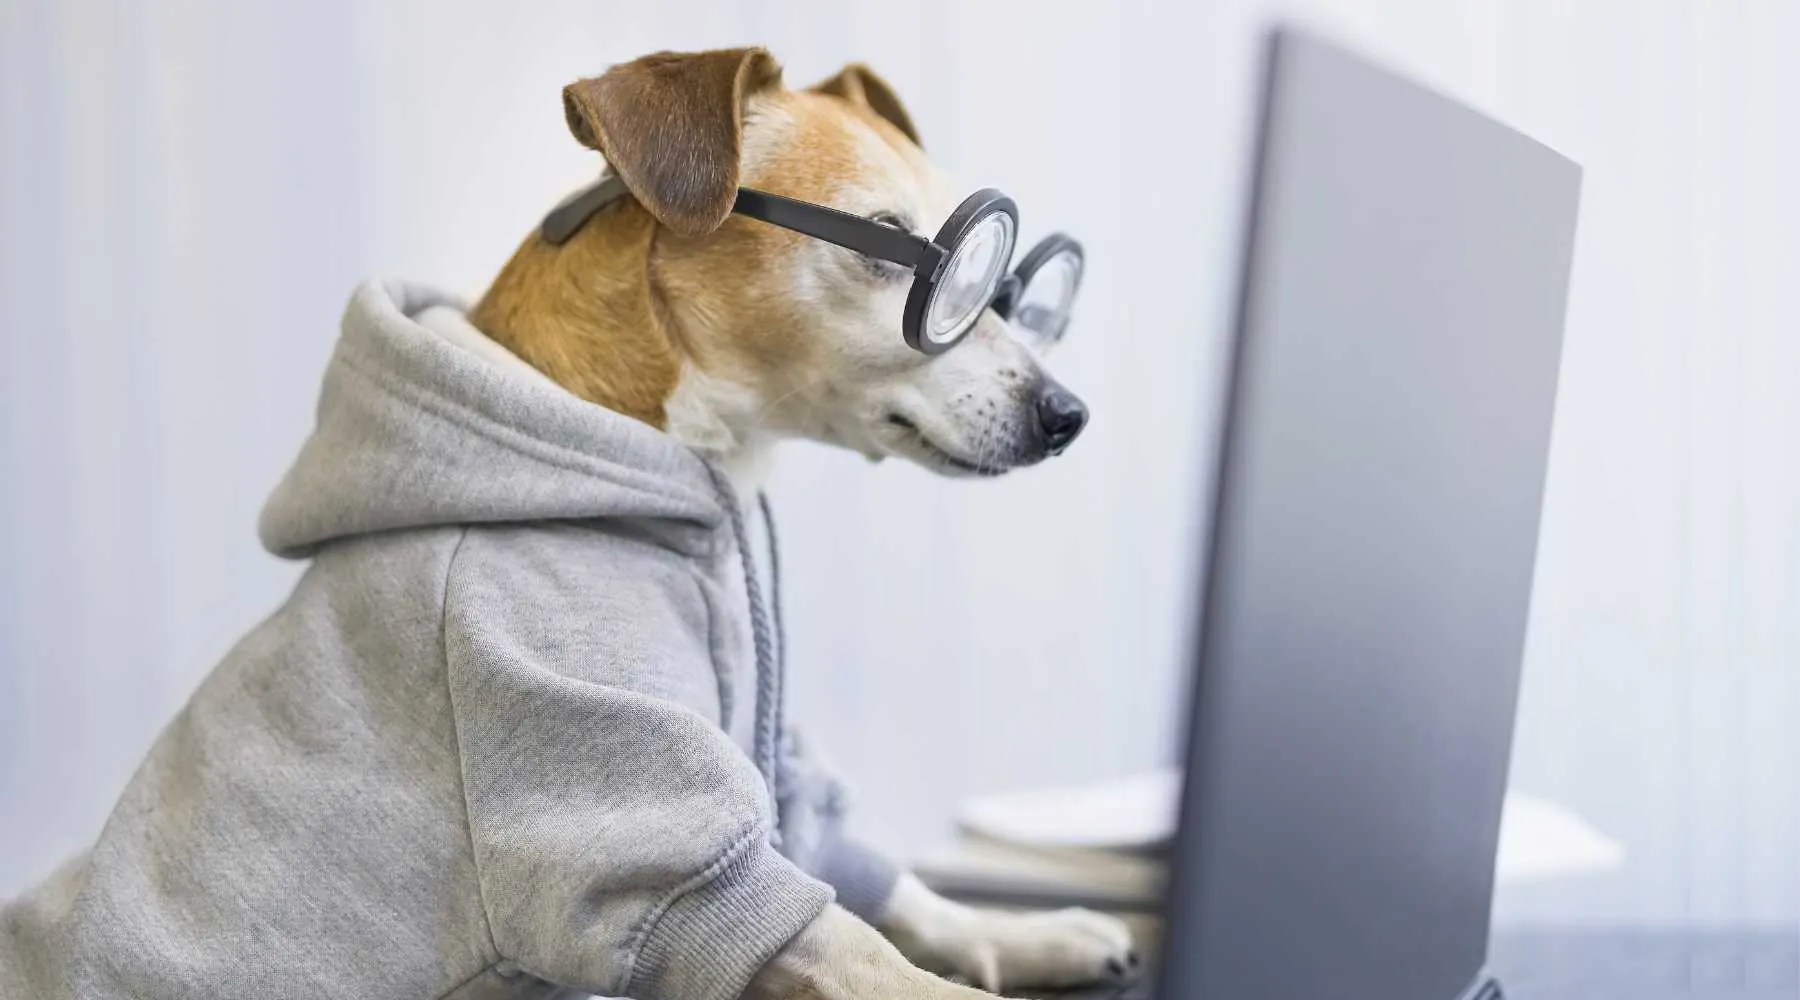 A dog working on a laptop